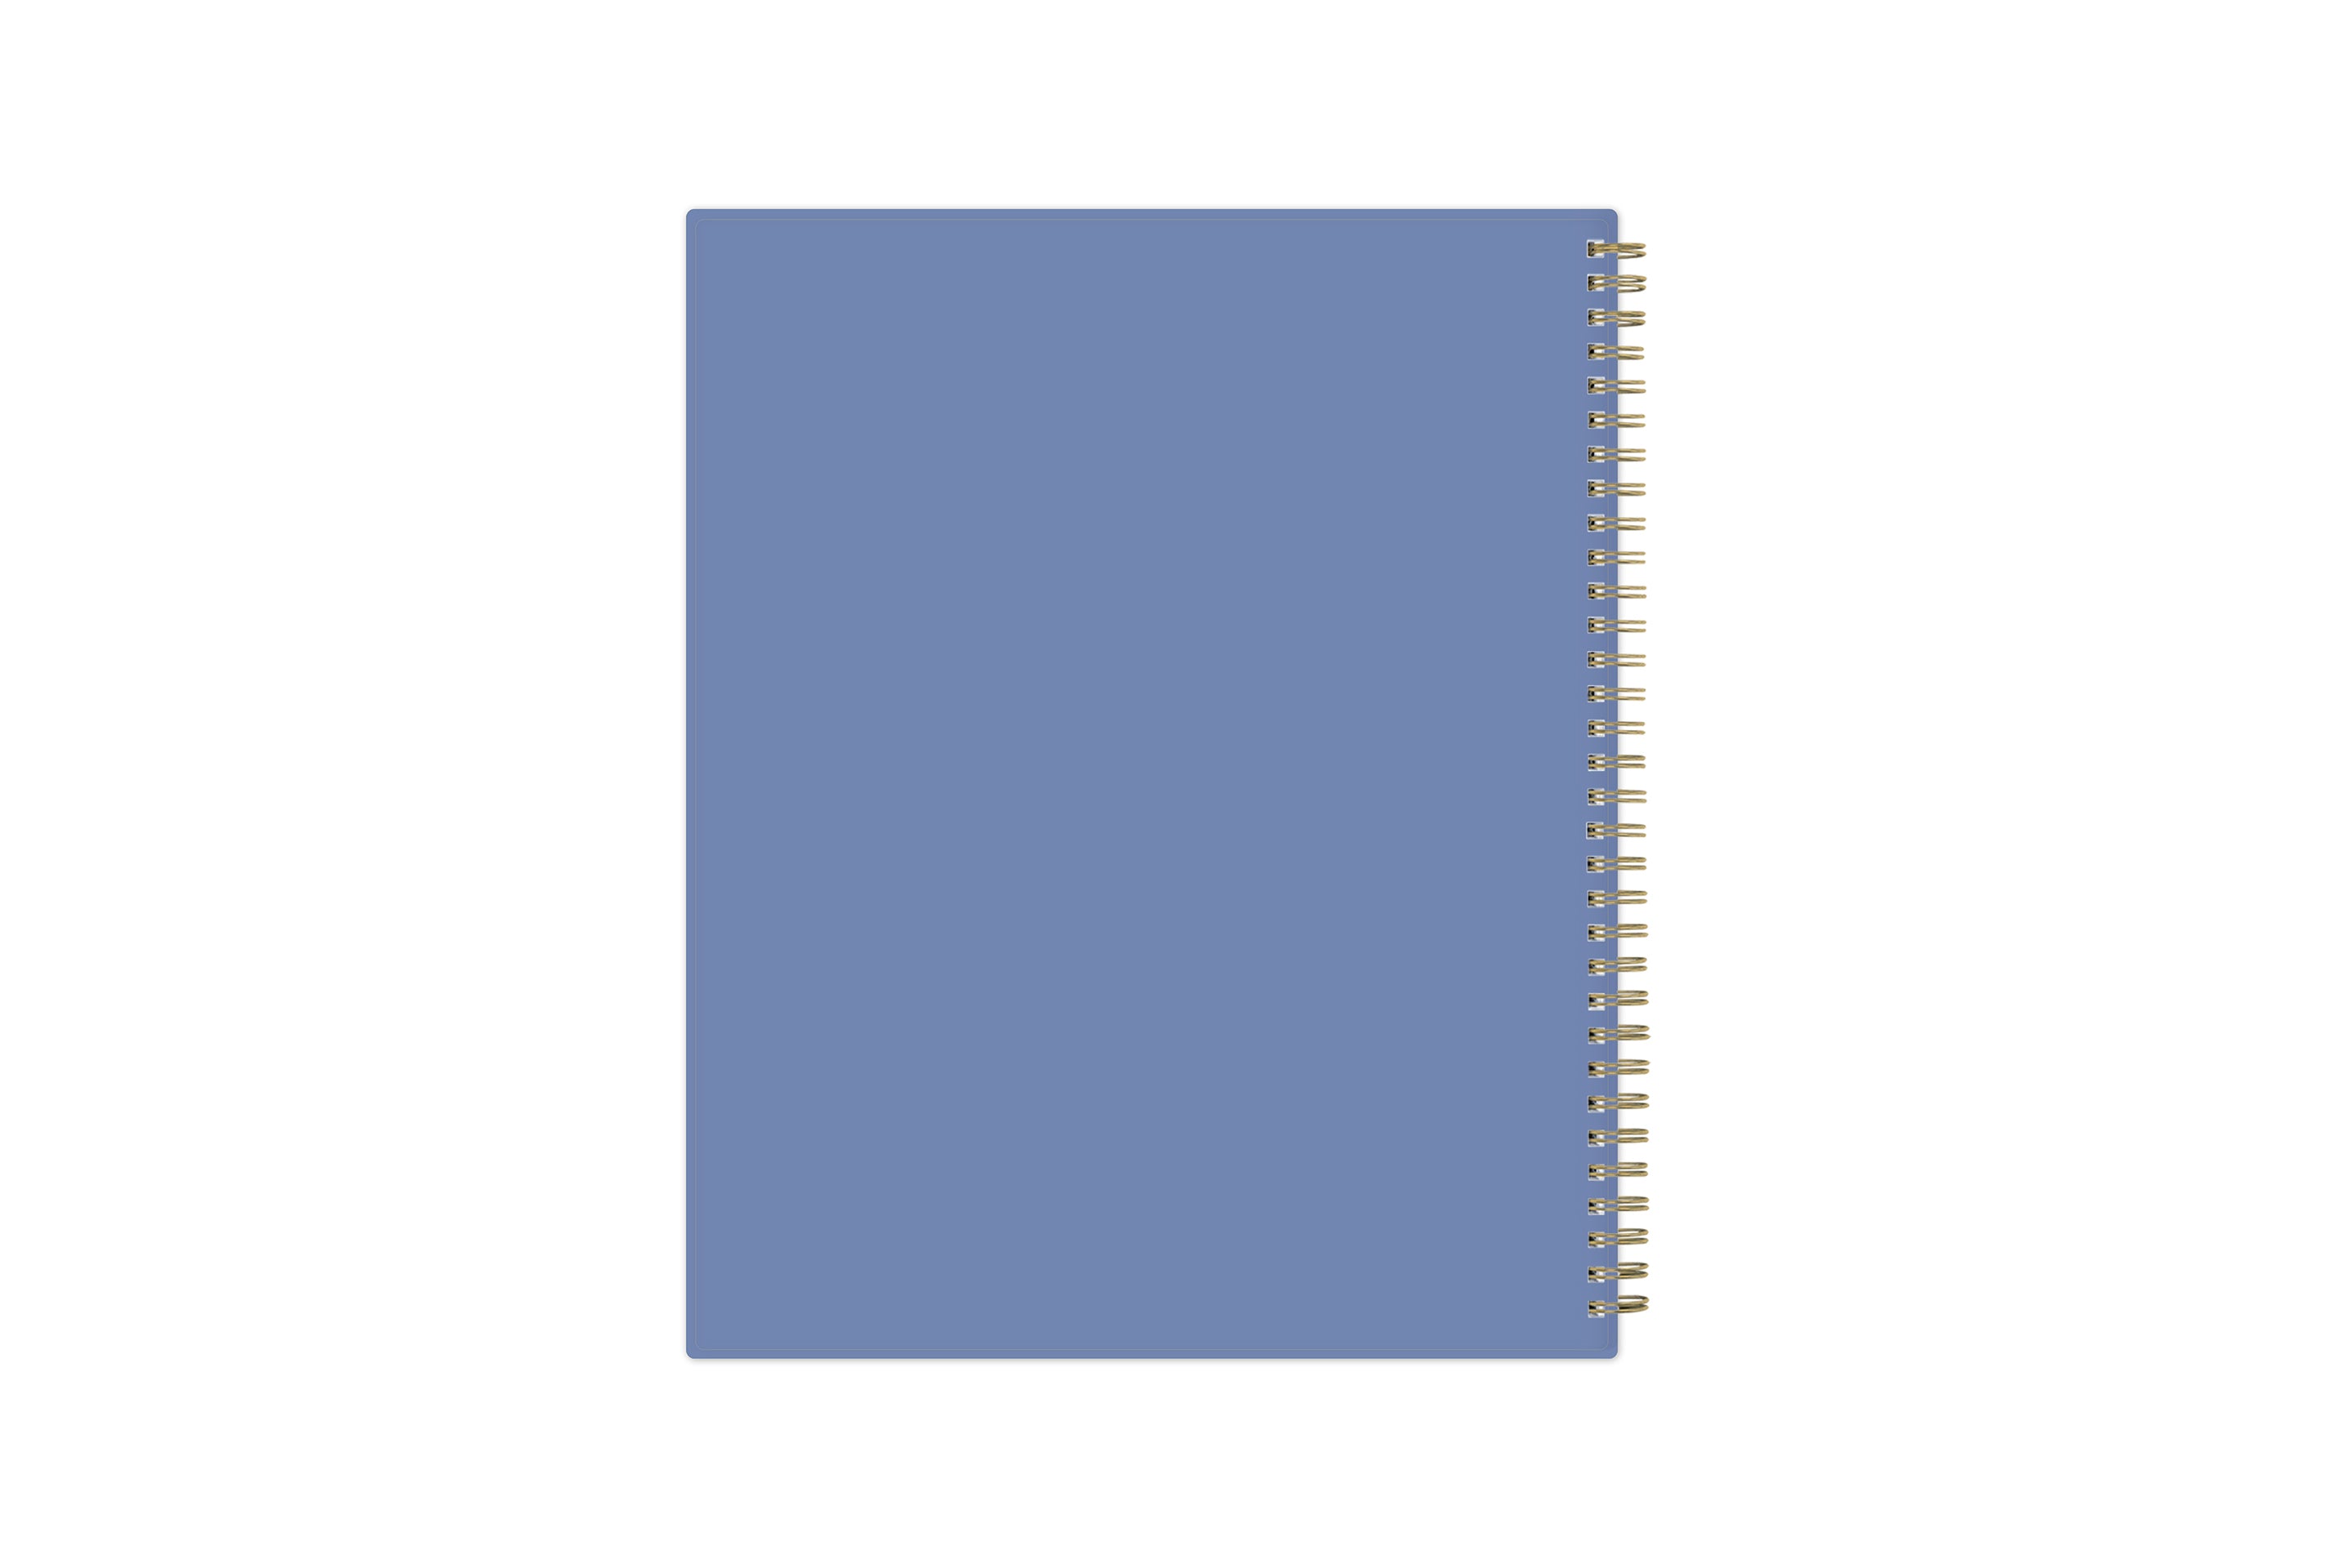 solid light blue background on 8.5x11 planner size